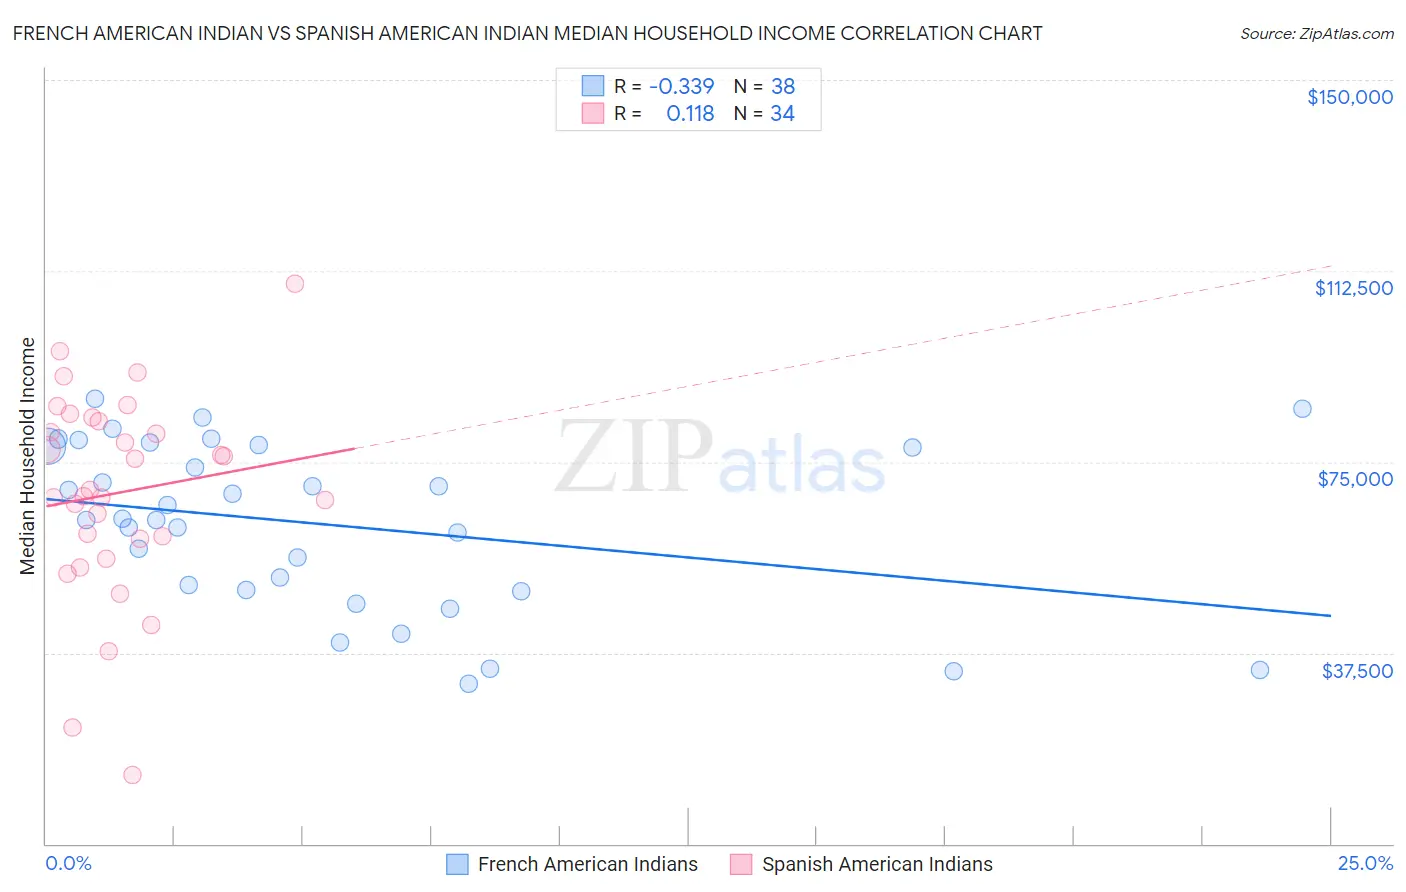 French American Indian vs Spanish American Indian Median Household Income